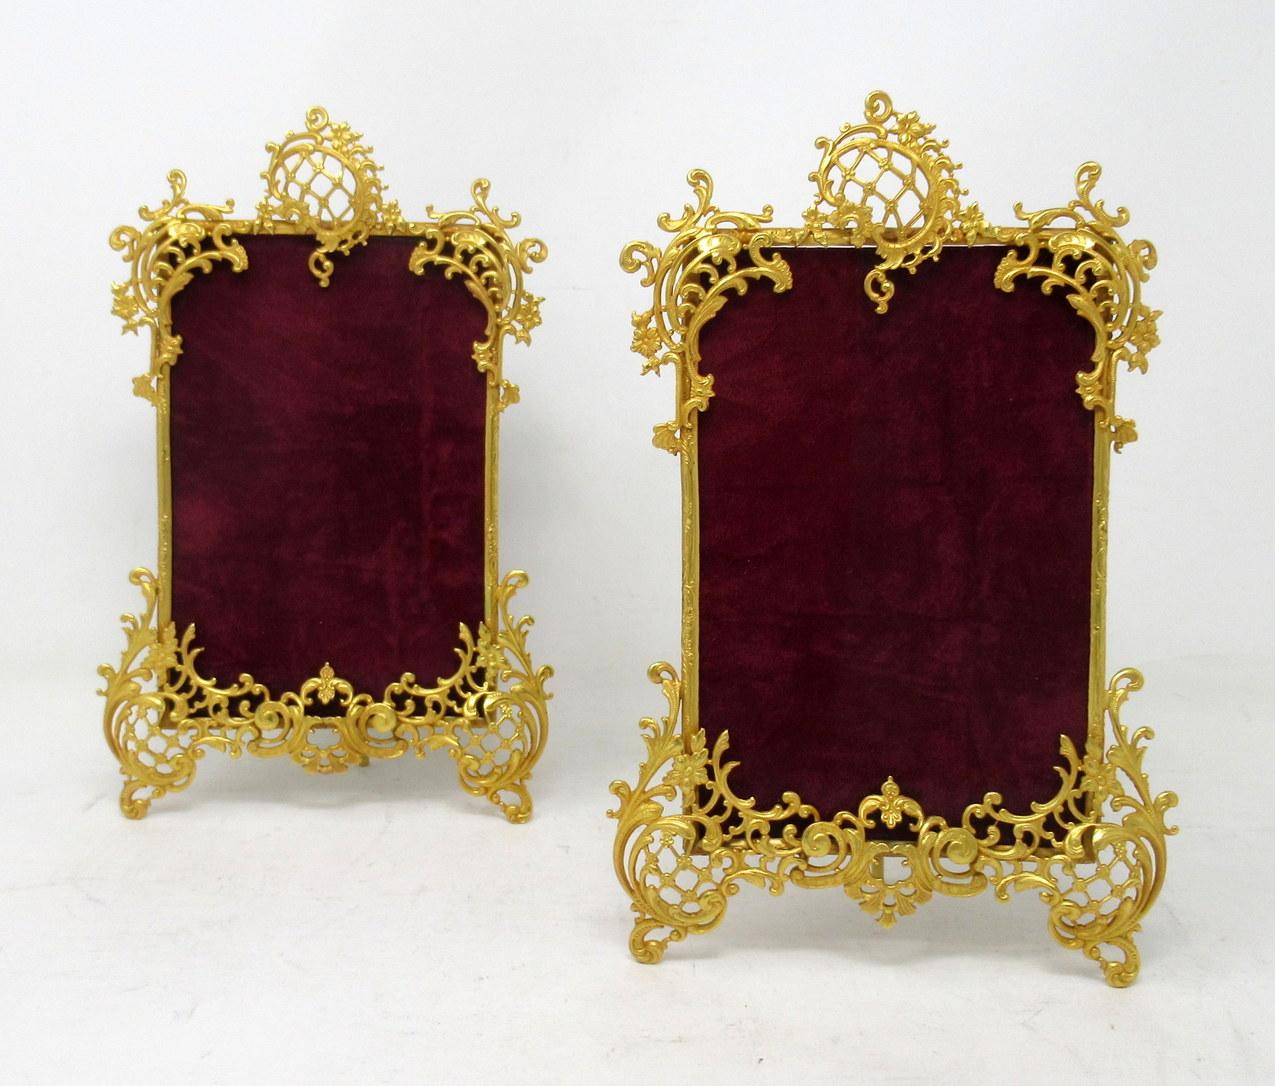 A stunning pair French Ormolu portrait standing photo frames of generous proportions, mid to late nineteenth century. 

The rectangular shaped highly decorative ormolu leafy frame enclosing a single portrait shape photo inset space surmounted with